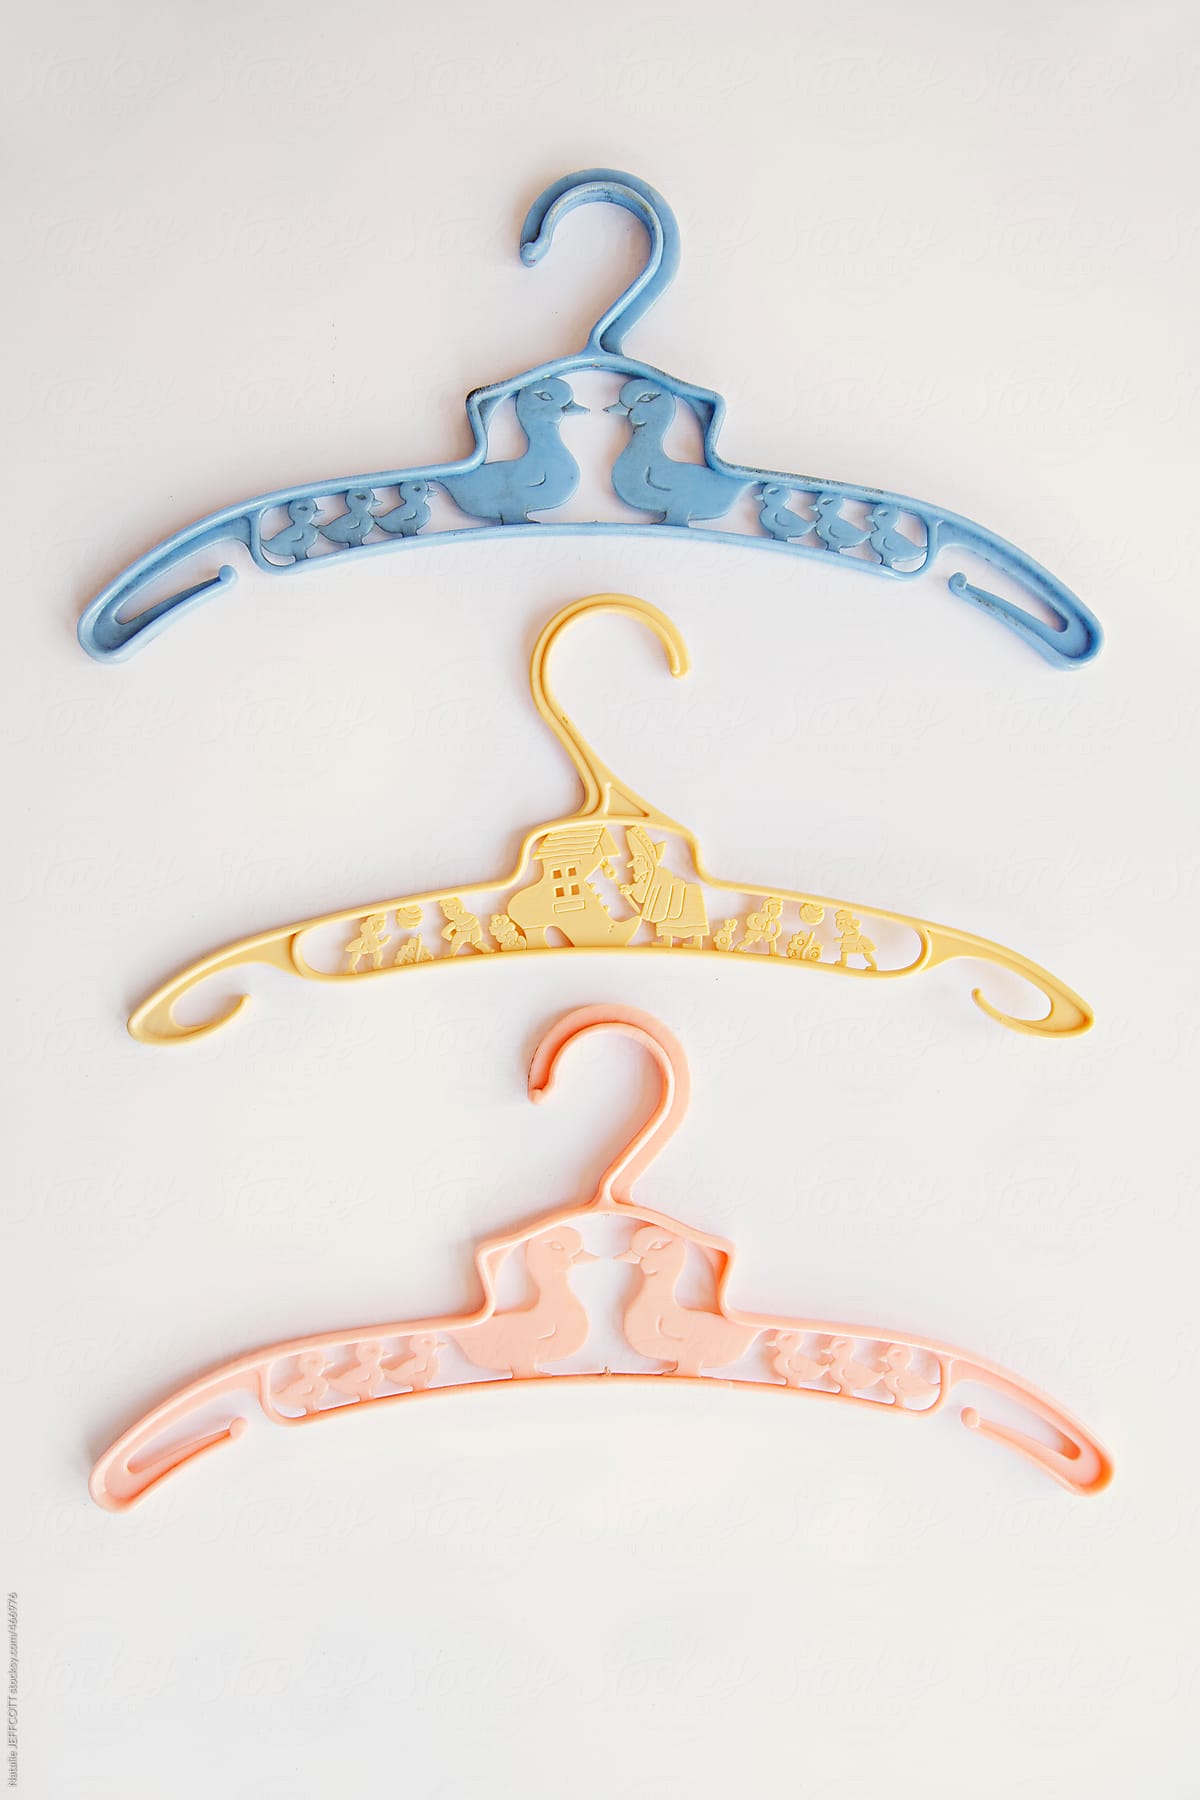 A Set Of Three Baby Vintage Clothes Hangers by Stocksy Contributor  Natalie JEFFCOTT - Stocksy